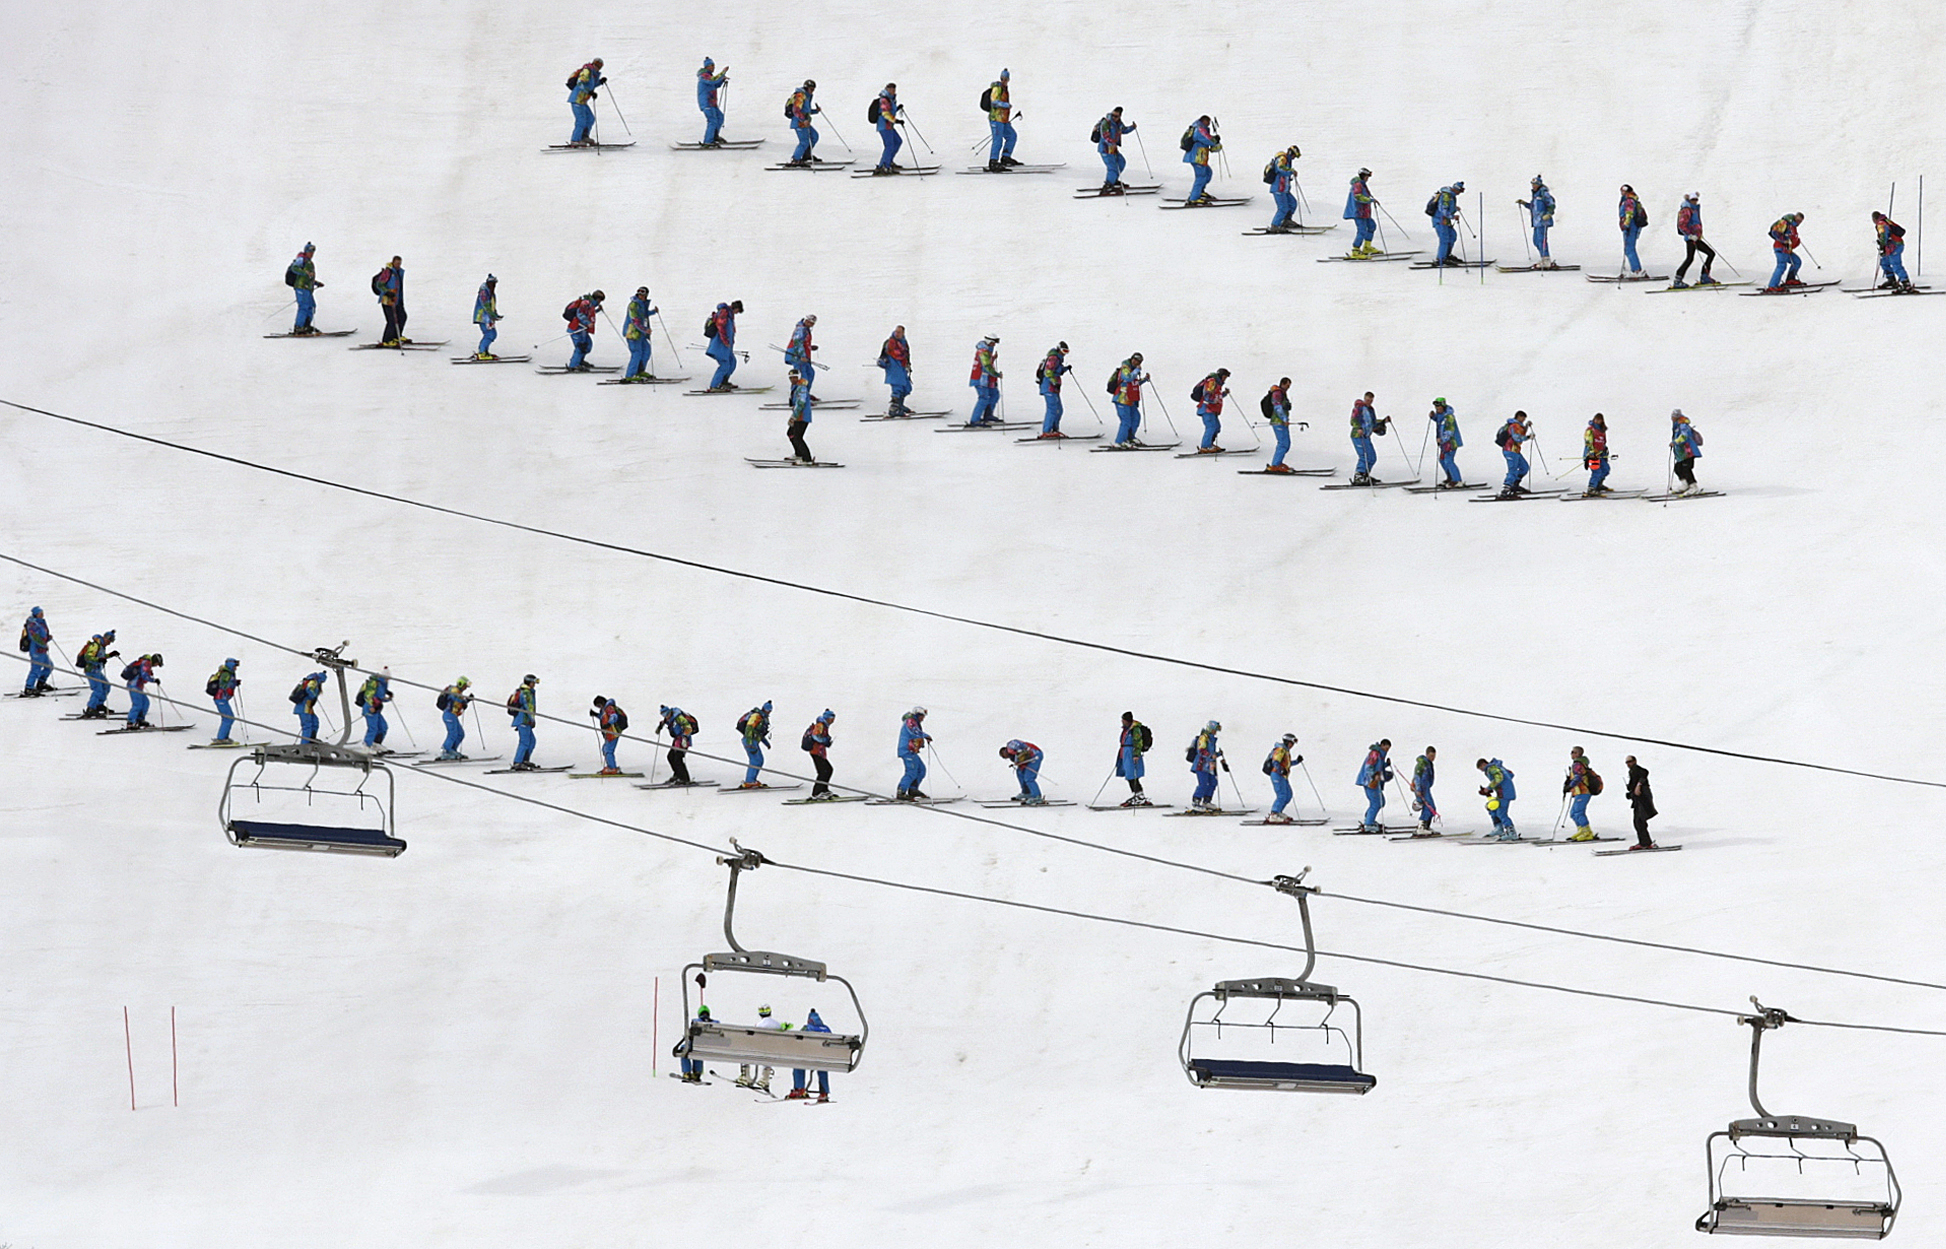 Slippers prepare the course ahead of the slalom portion of the men's supercombined.